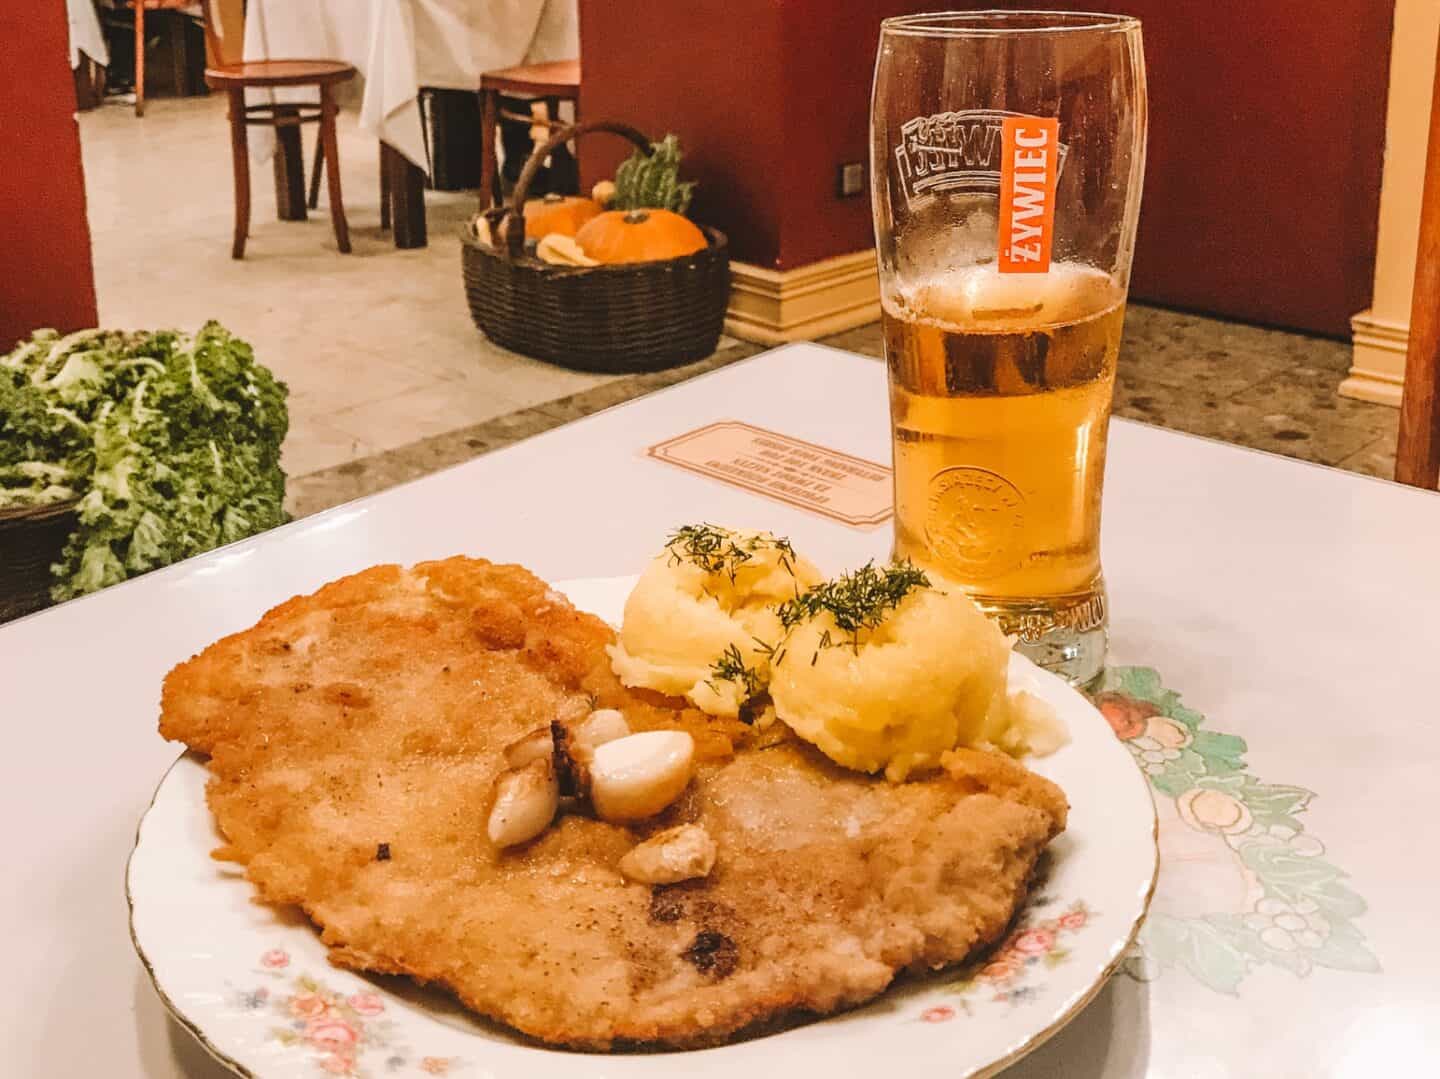 Kotlet schabowy from Polakowski during my long weekend in Krakow